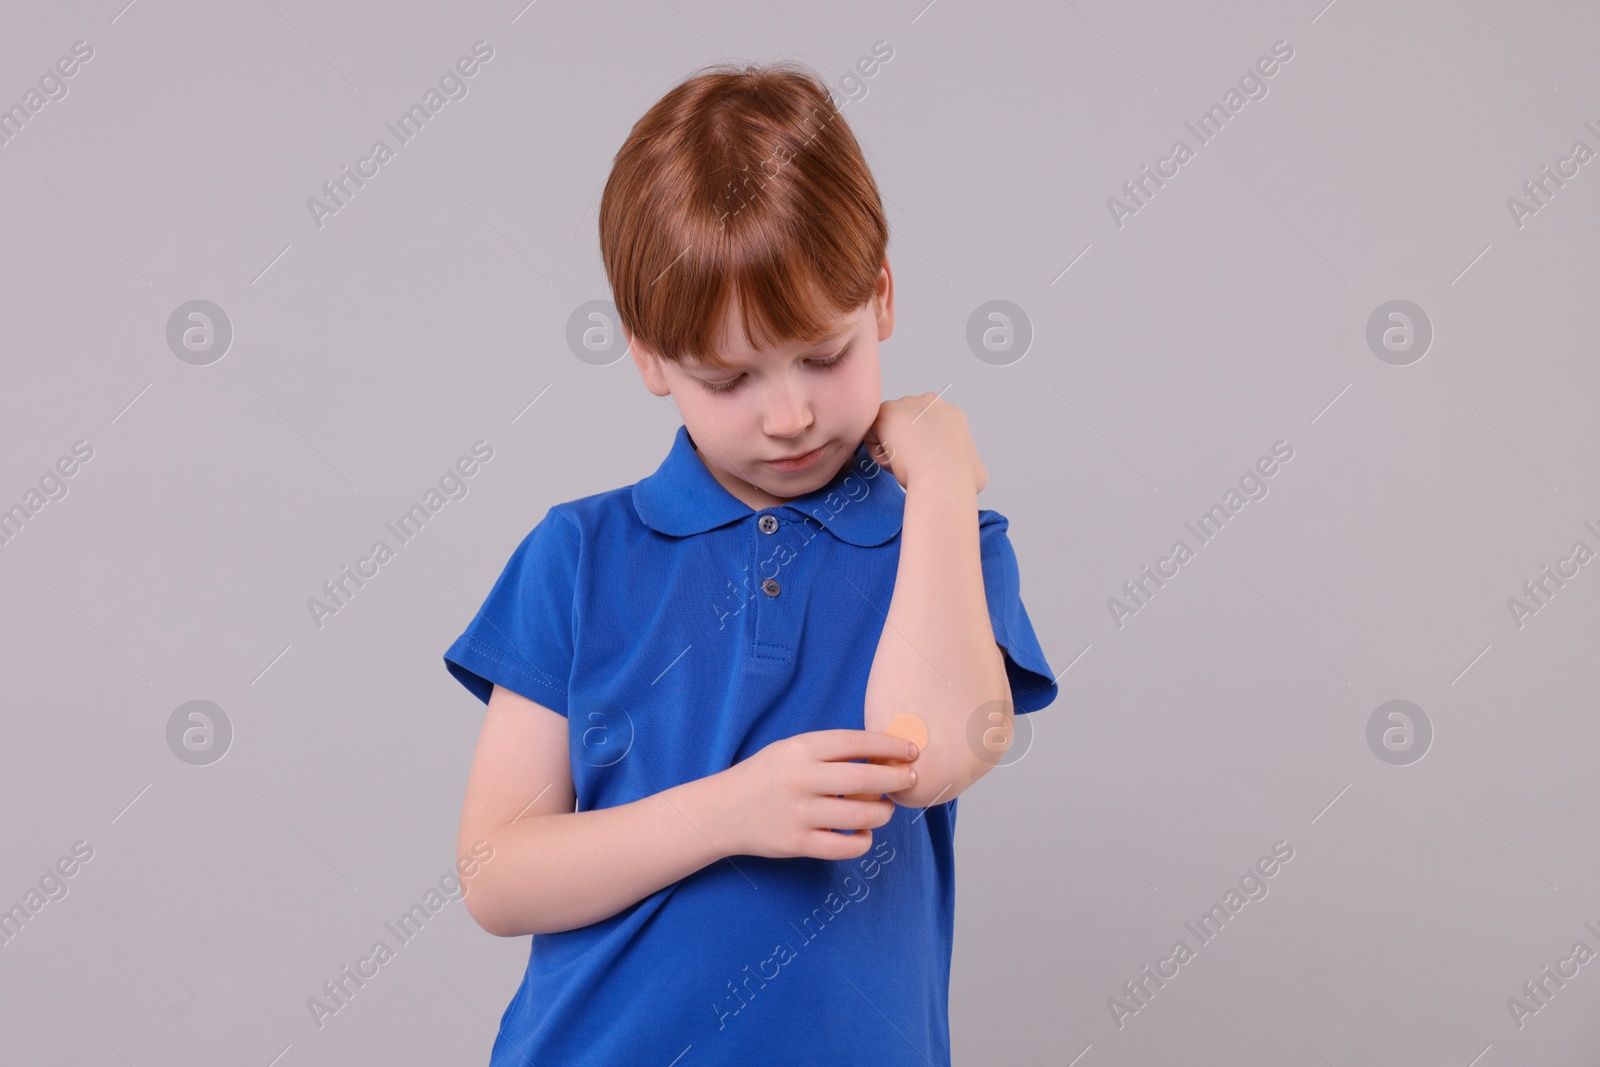 Photo of Little boy putting sticking plaster onto elbow against light grey background